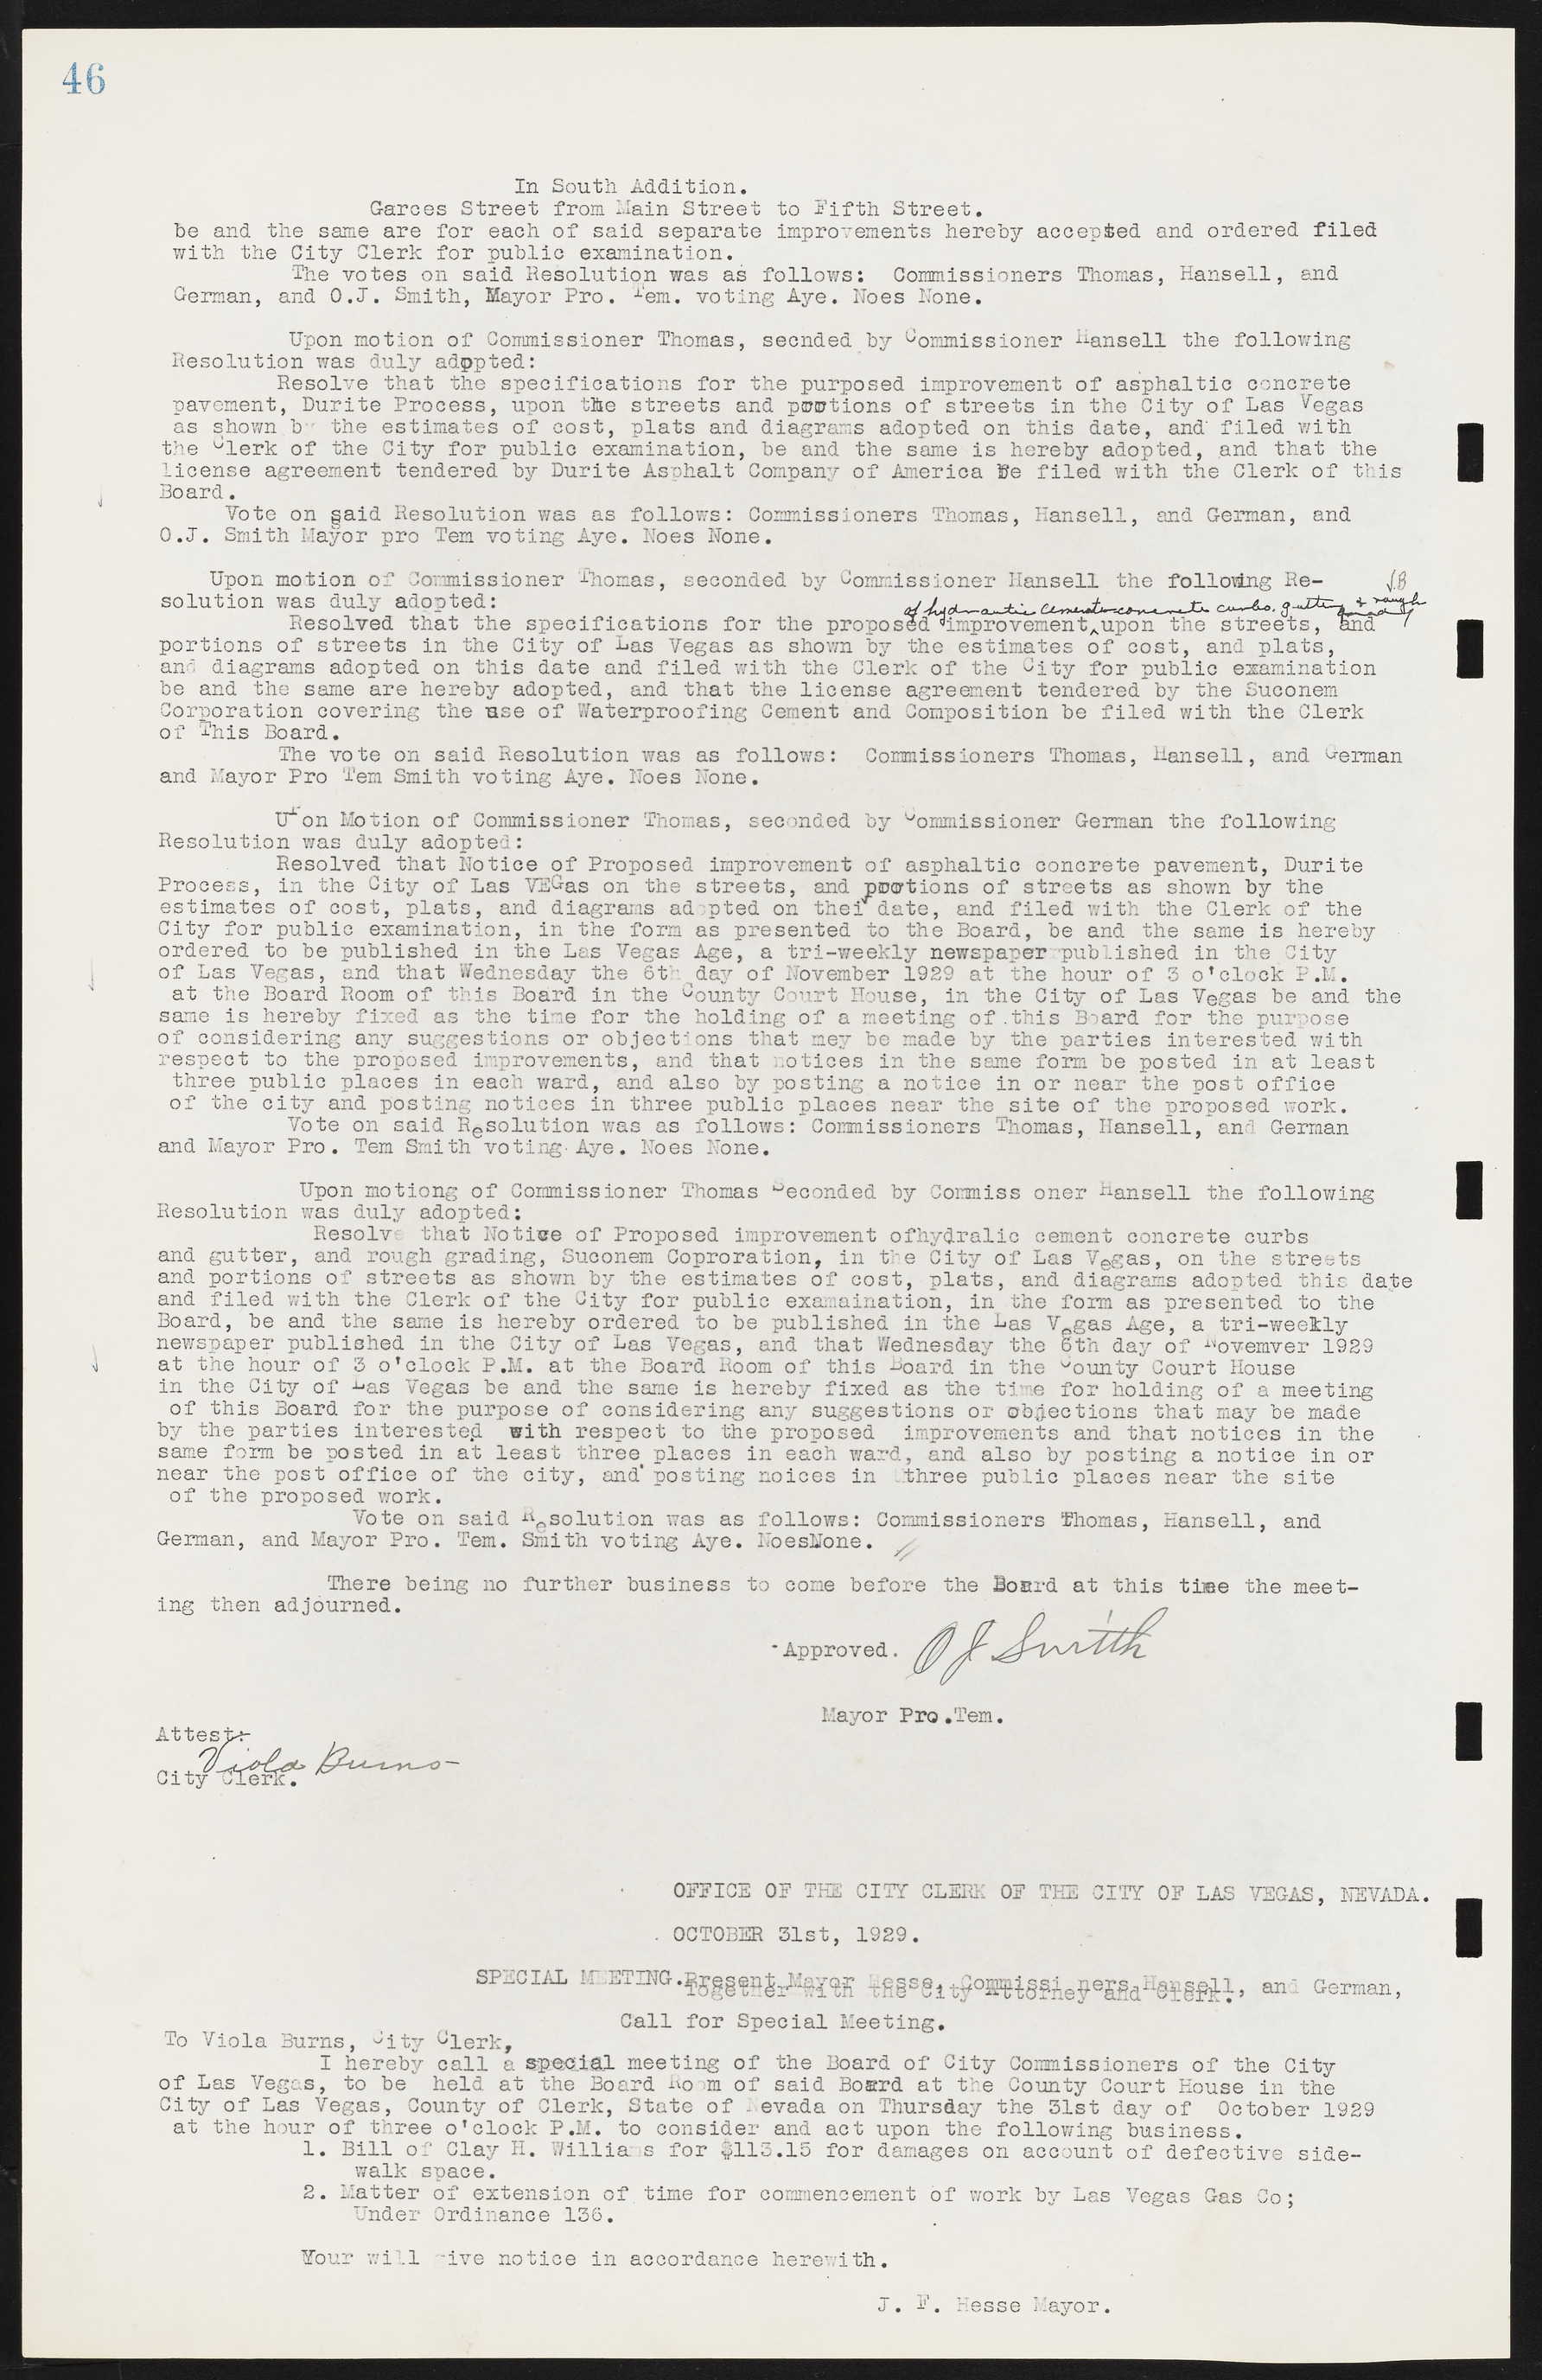 Las Vegas City Commission Minutes, May 14, 1929 to February 11, 1937, lvc000003-52